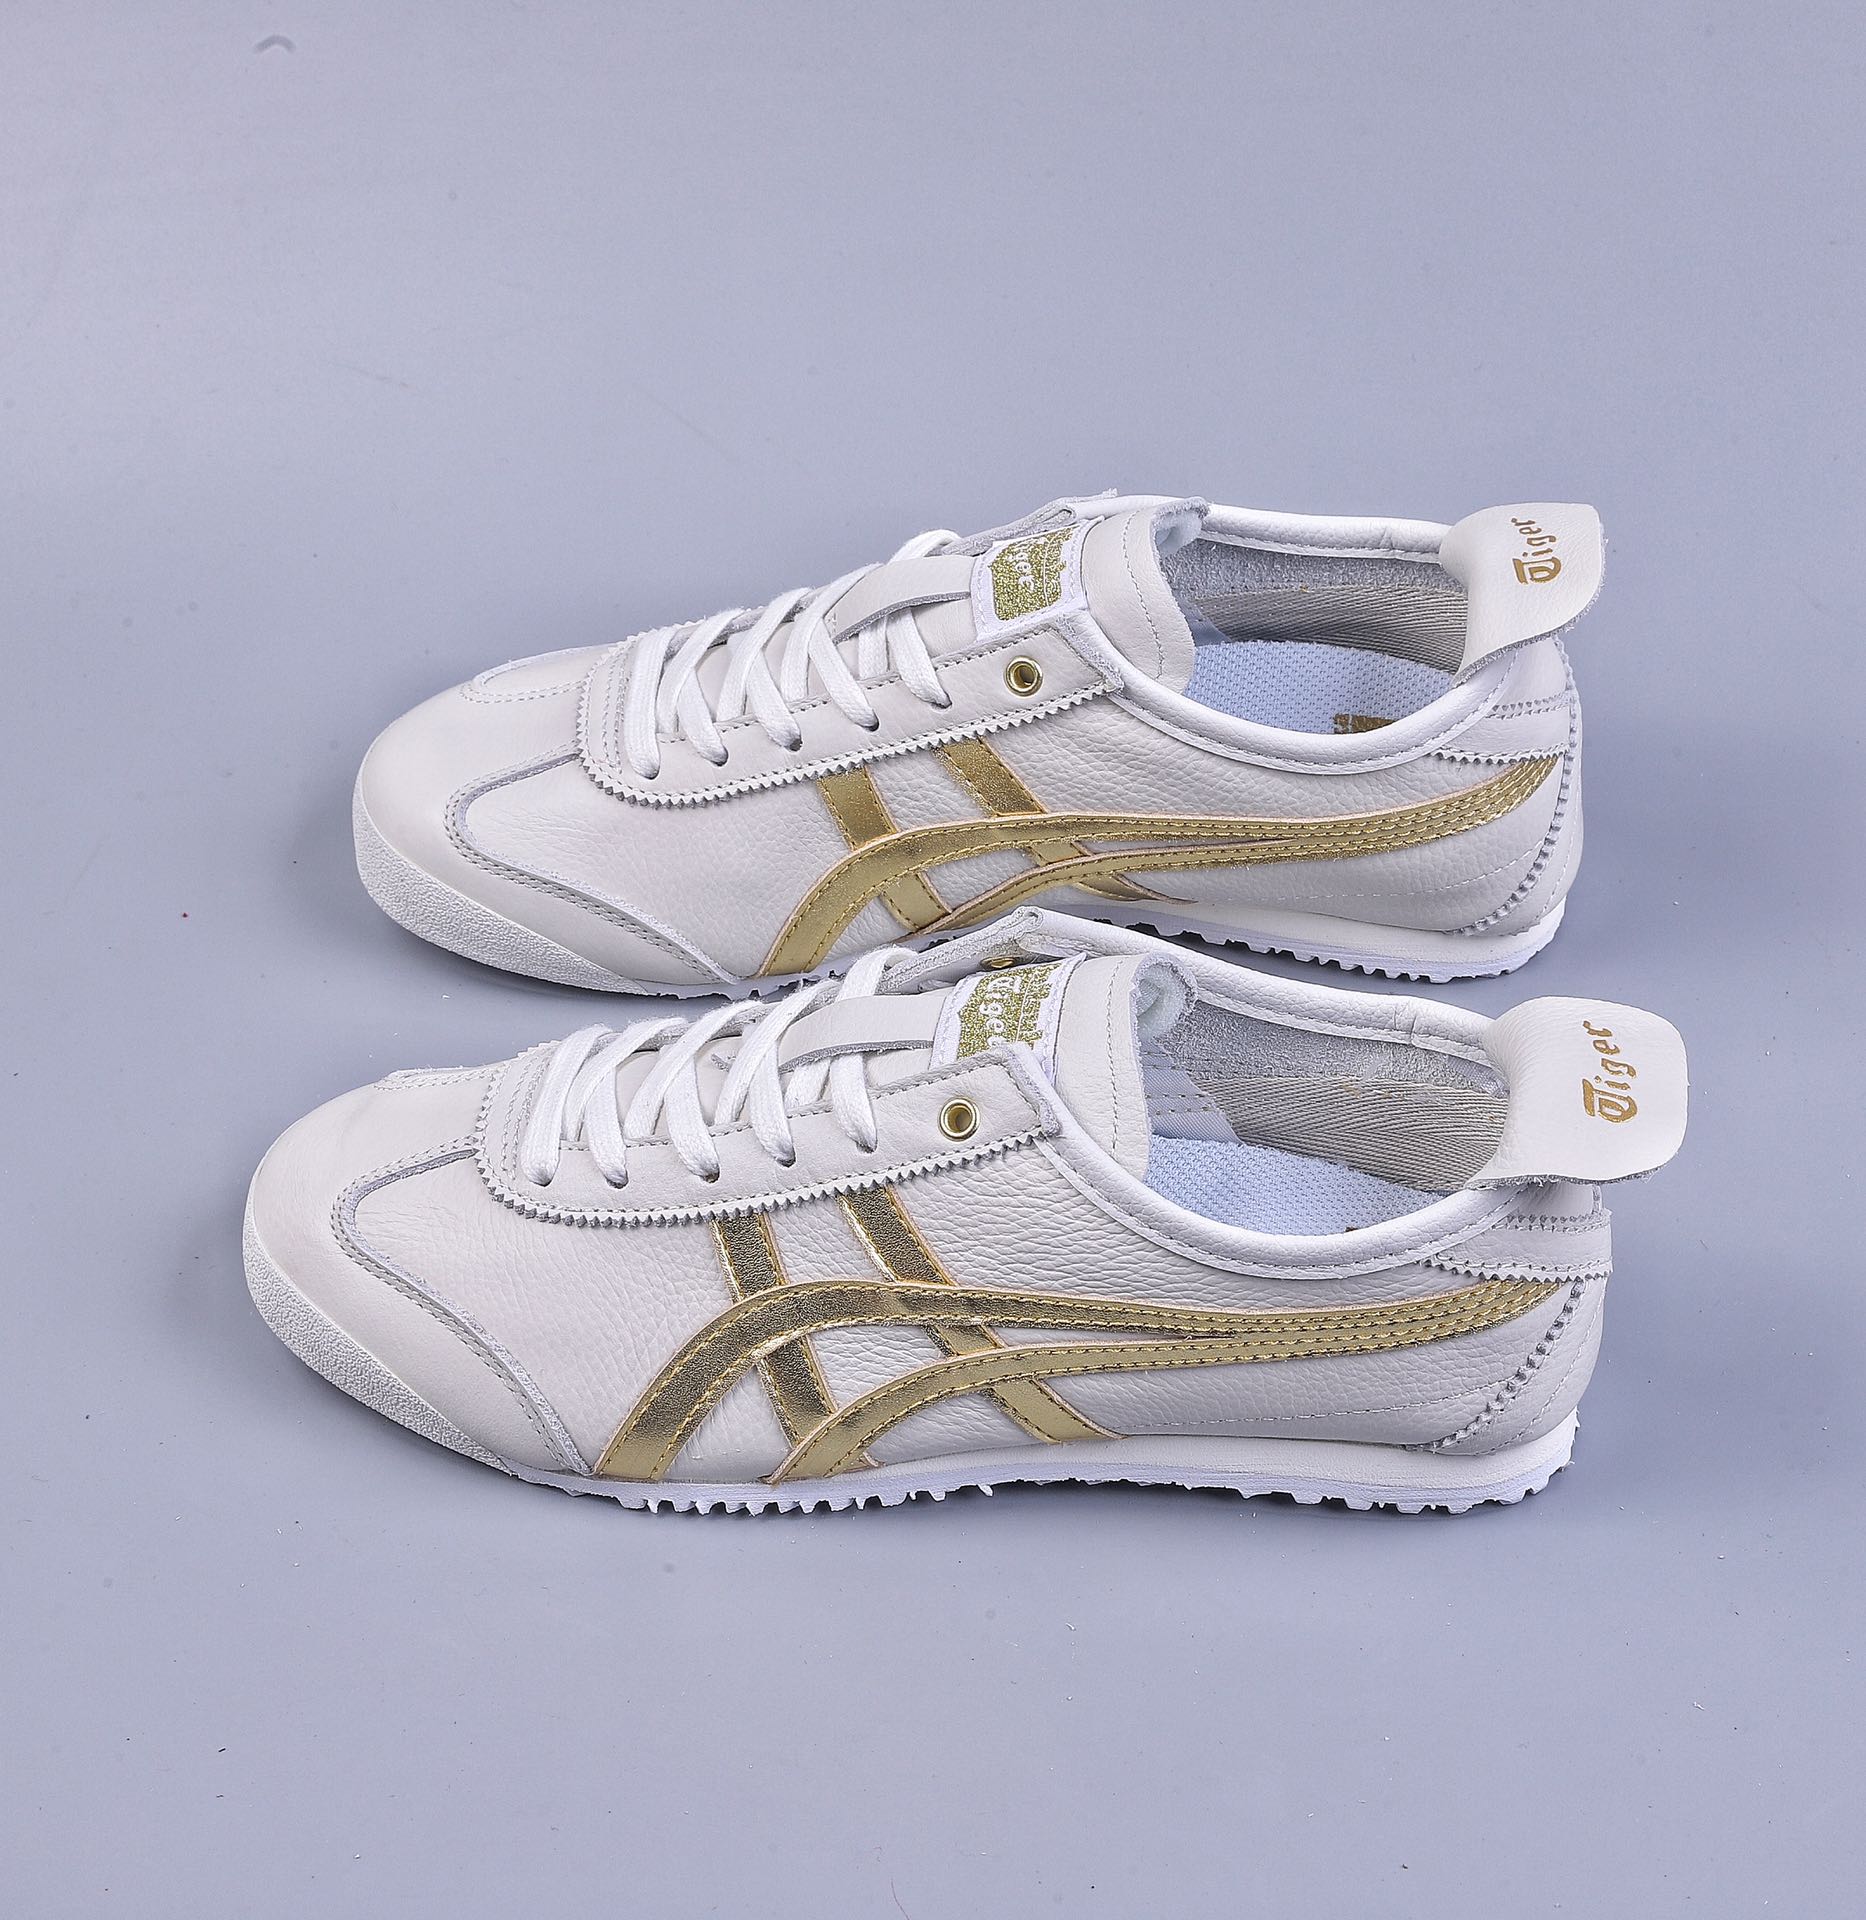 5A first layer Onitsuka Tiger MEXICO 66 Onitsuka Tiger retro classic sneakers